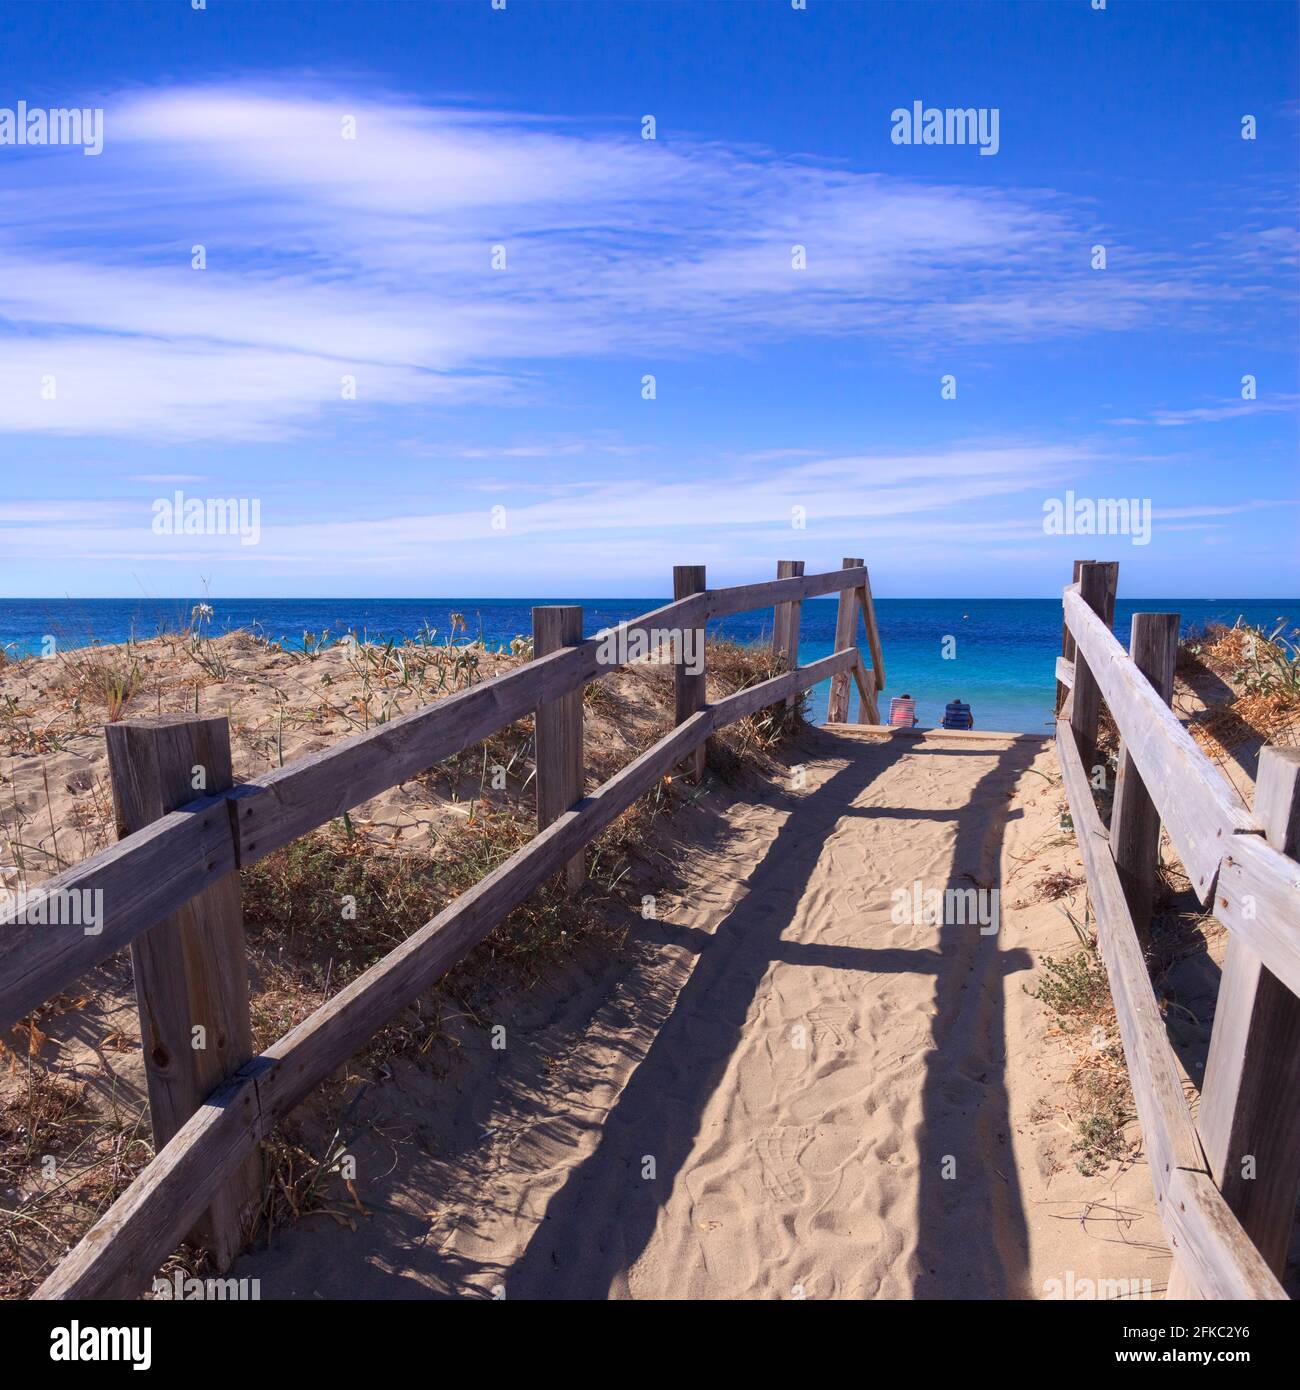 Boardwalk on the beach: fence between sea dunes in Salento, Apulia (Italy). Tourists sitting on deck chairs. Stock Photo